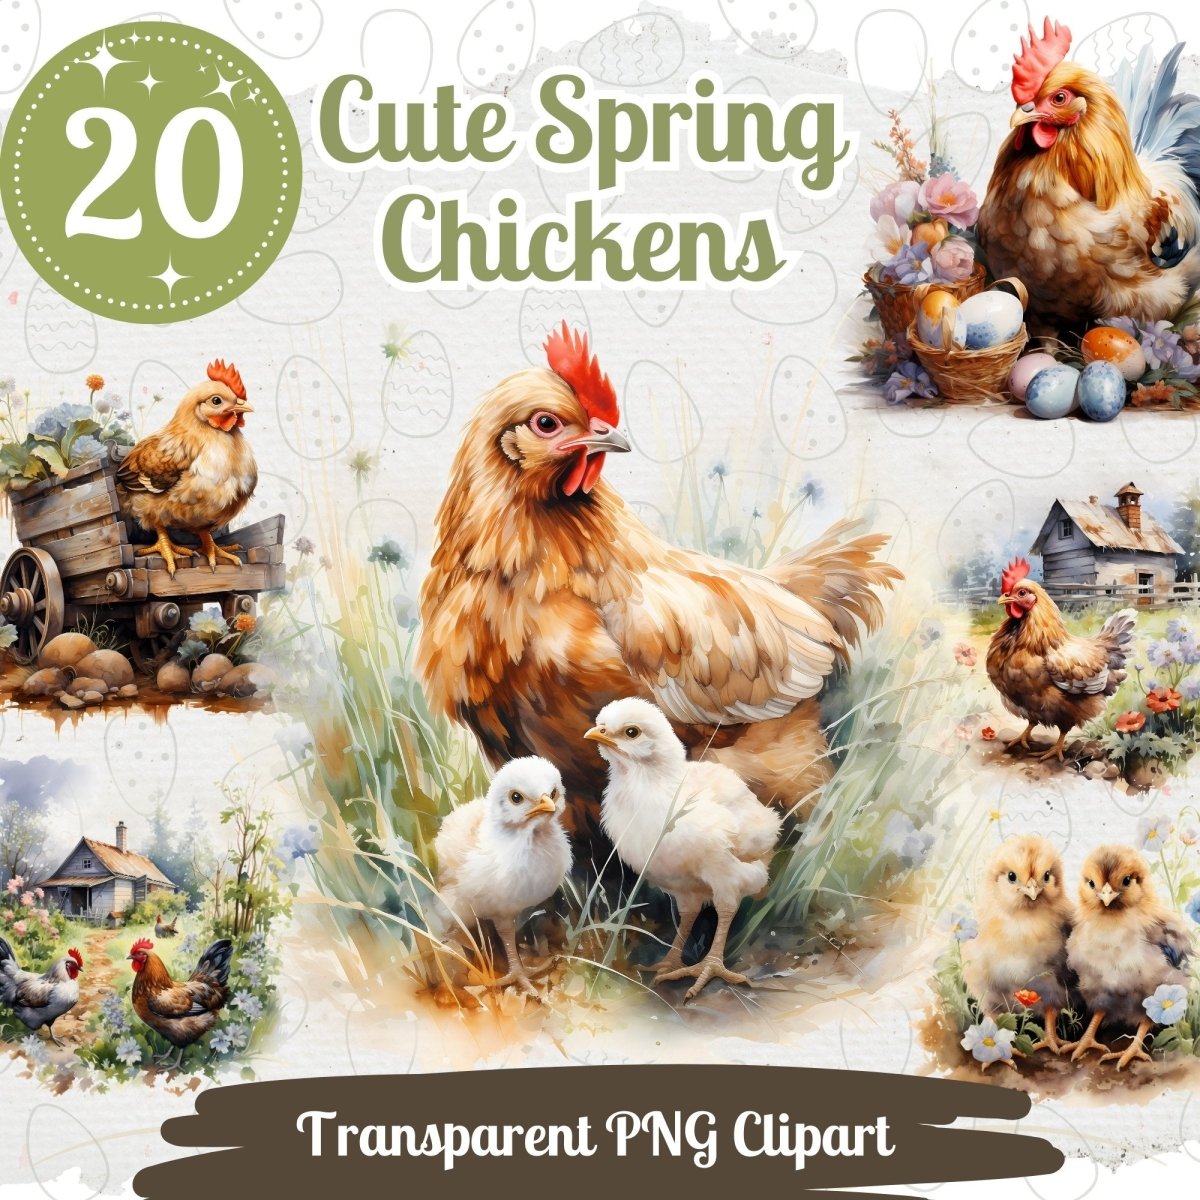 Spring Chicken Watercolor Clipart Bundle - 20 PNGs - Everything Pixel